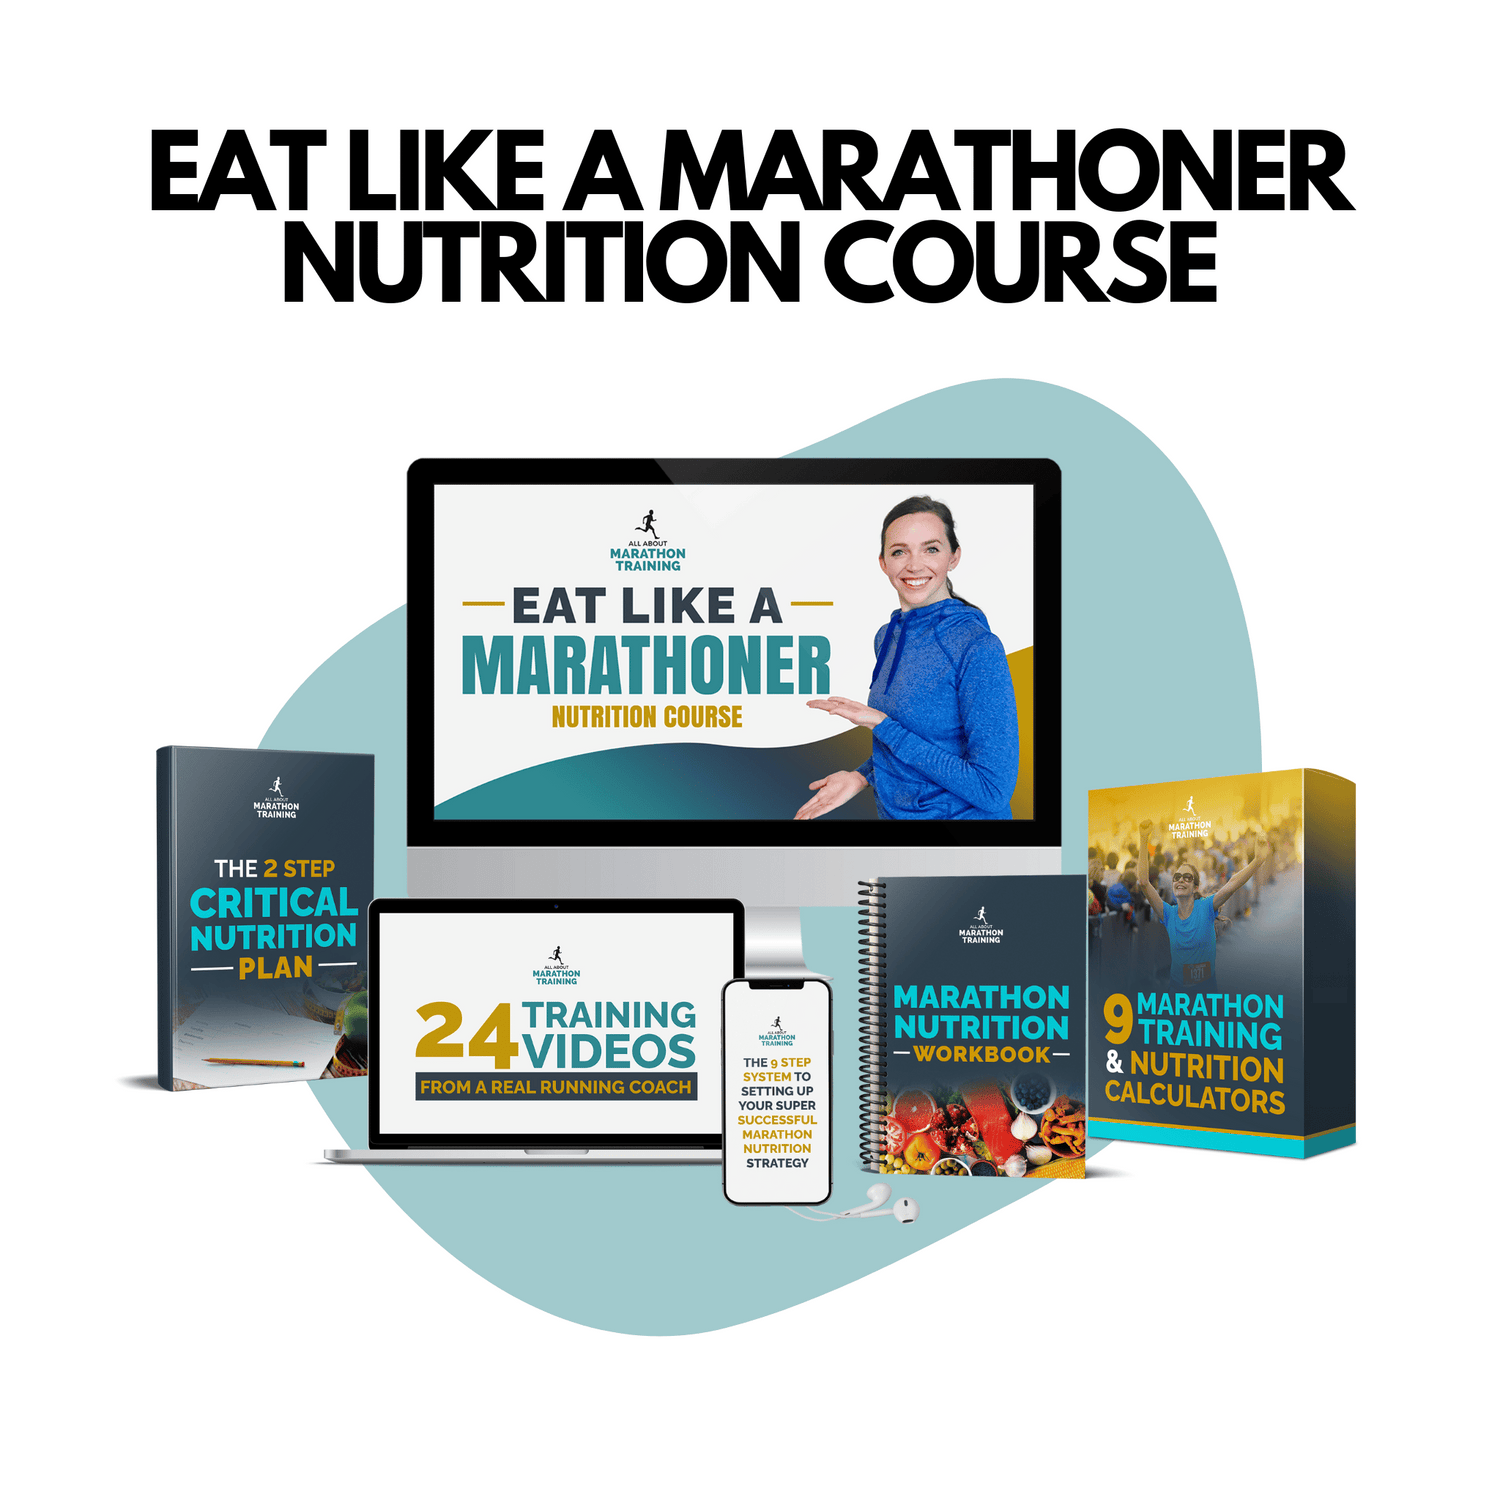 This is a mockup of the Eat Like a Marathoner Nutrition Course for Runners